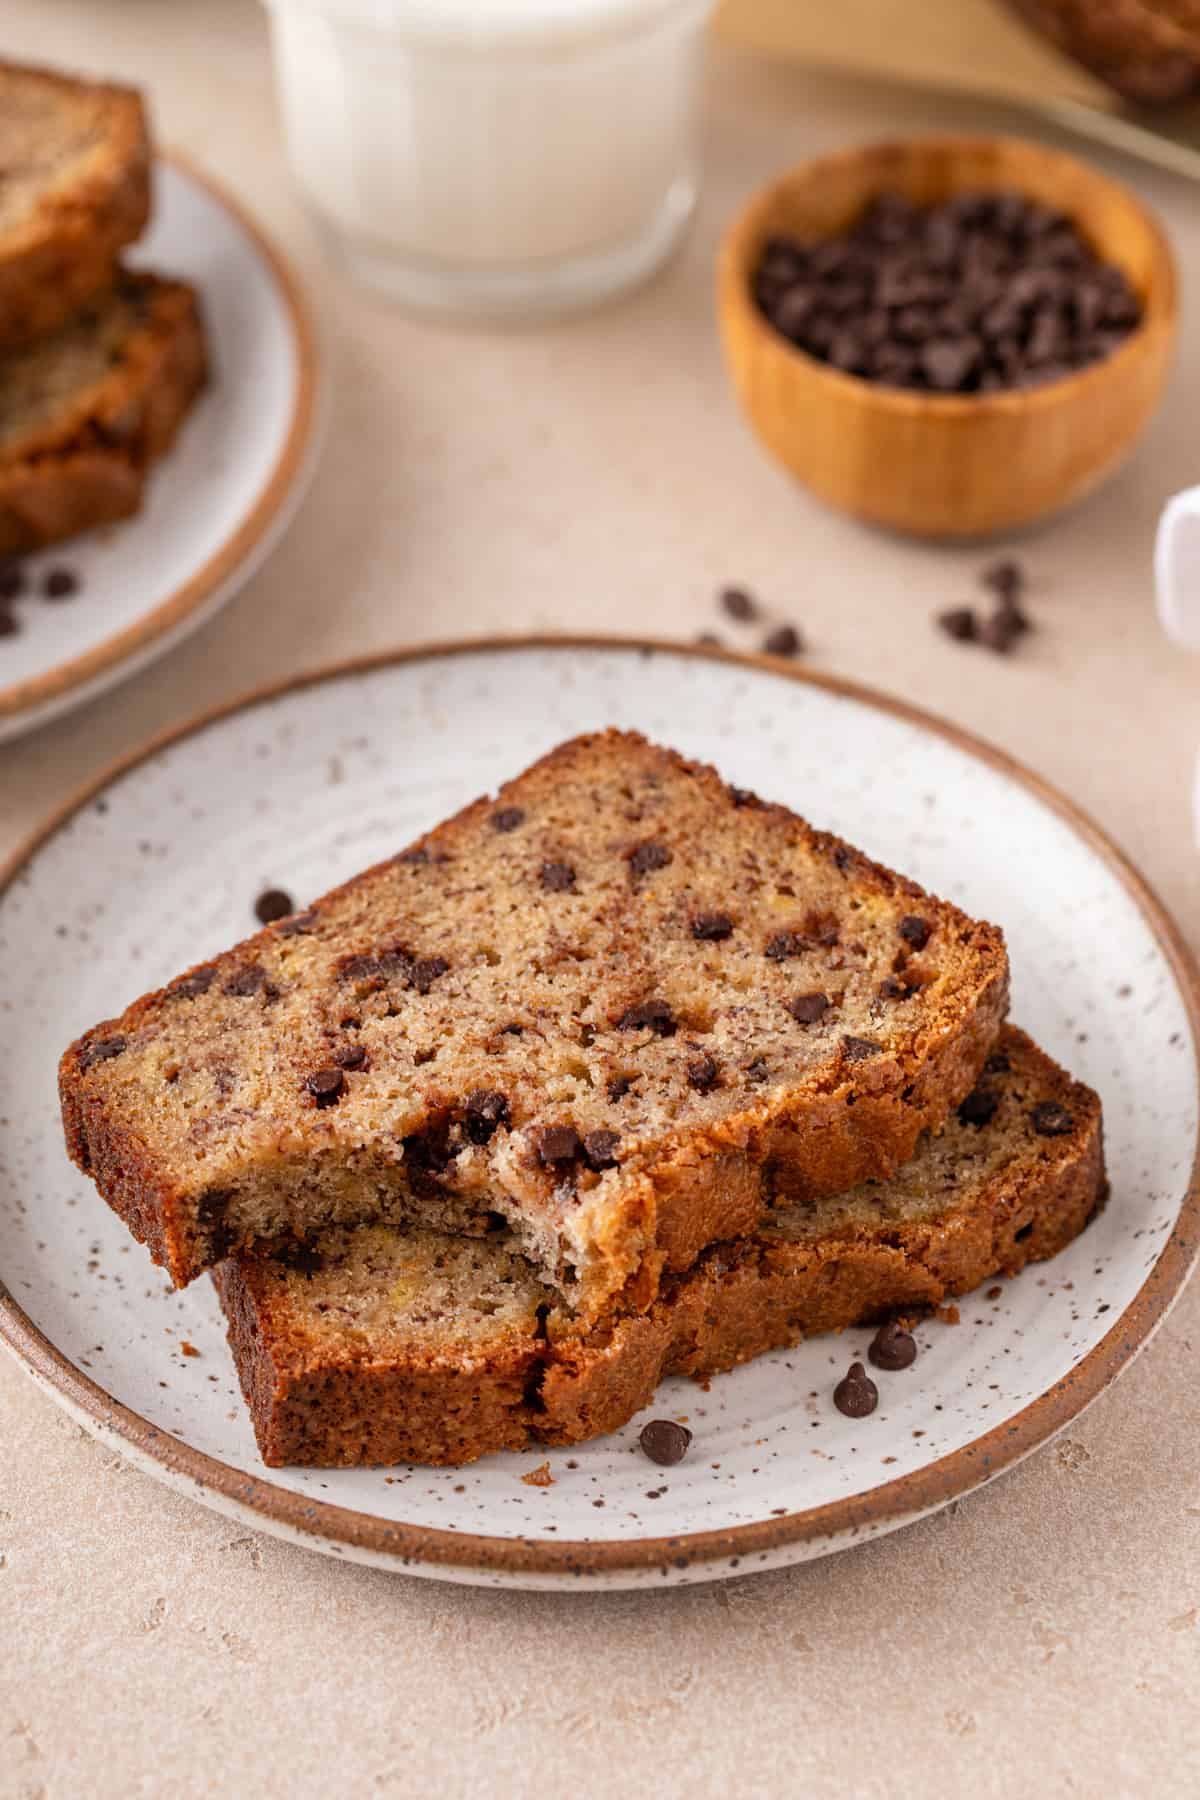 Two slices of chocolate chip banana bread on a plate, with a bite taken from the top slice.